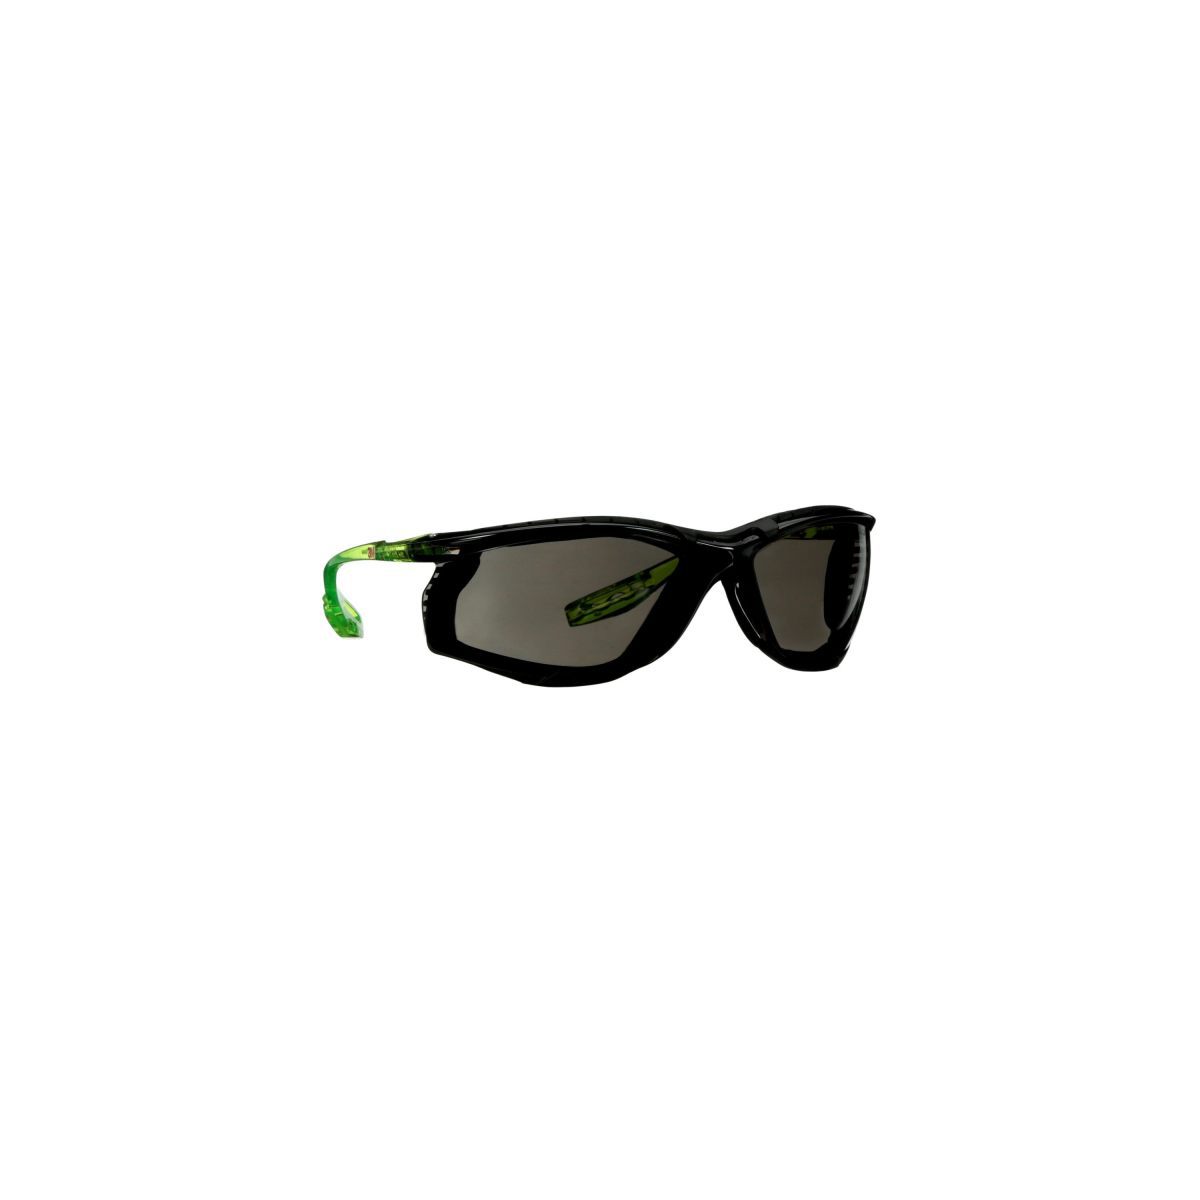 3M™ Solus™ CCS Series Black And Bright Green Safety Glasses With Gray Scotchgard™ Anti-Fog/Anti-Scratch Lens And Foam Gasket (Av